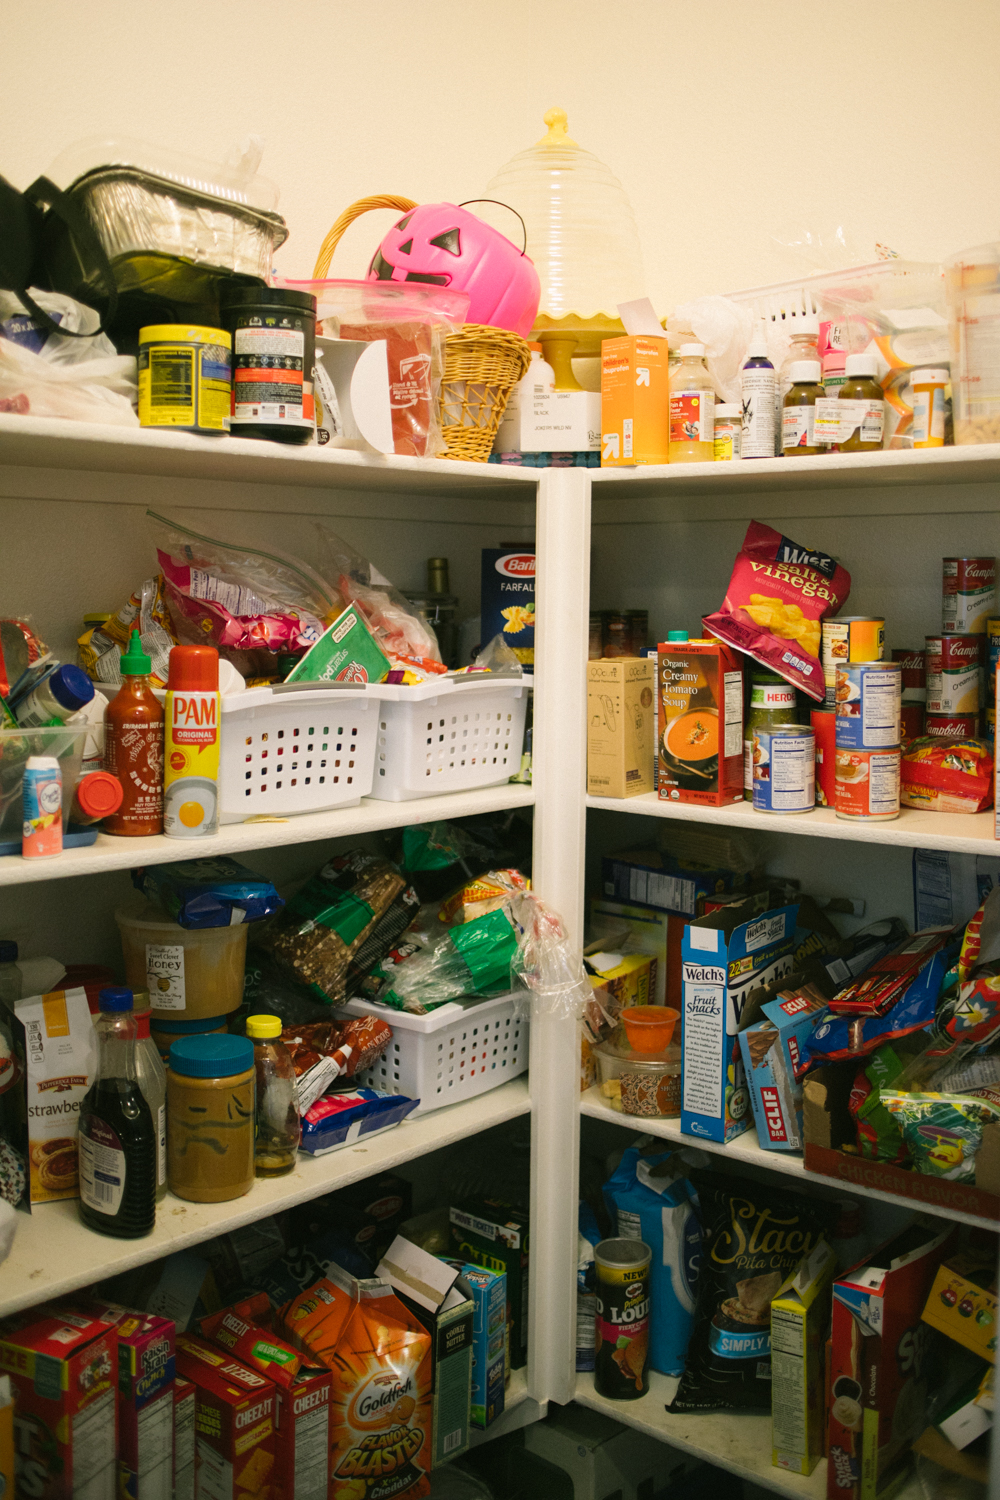 Pantry Organization Tips by popular Las Vegas bloggers Life of a Sister